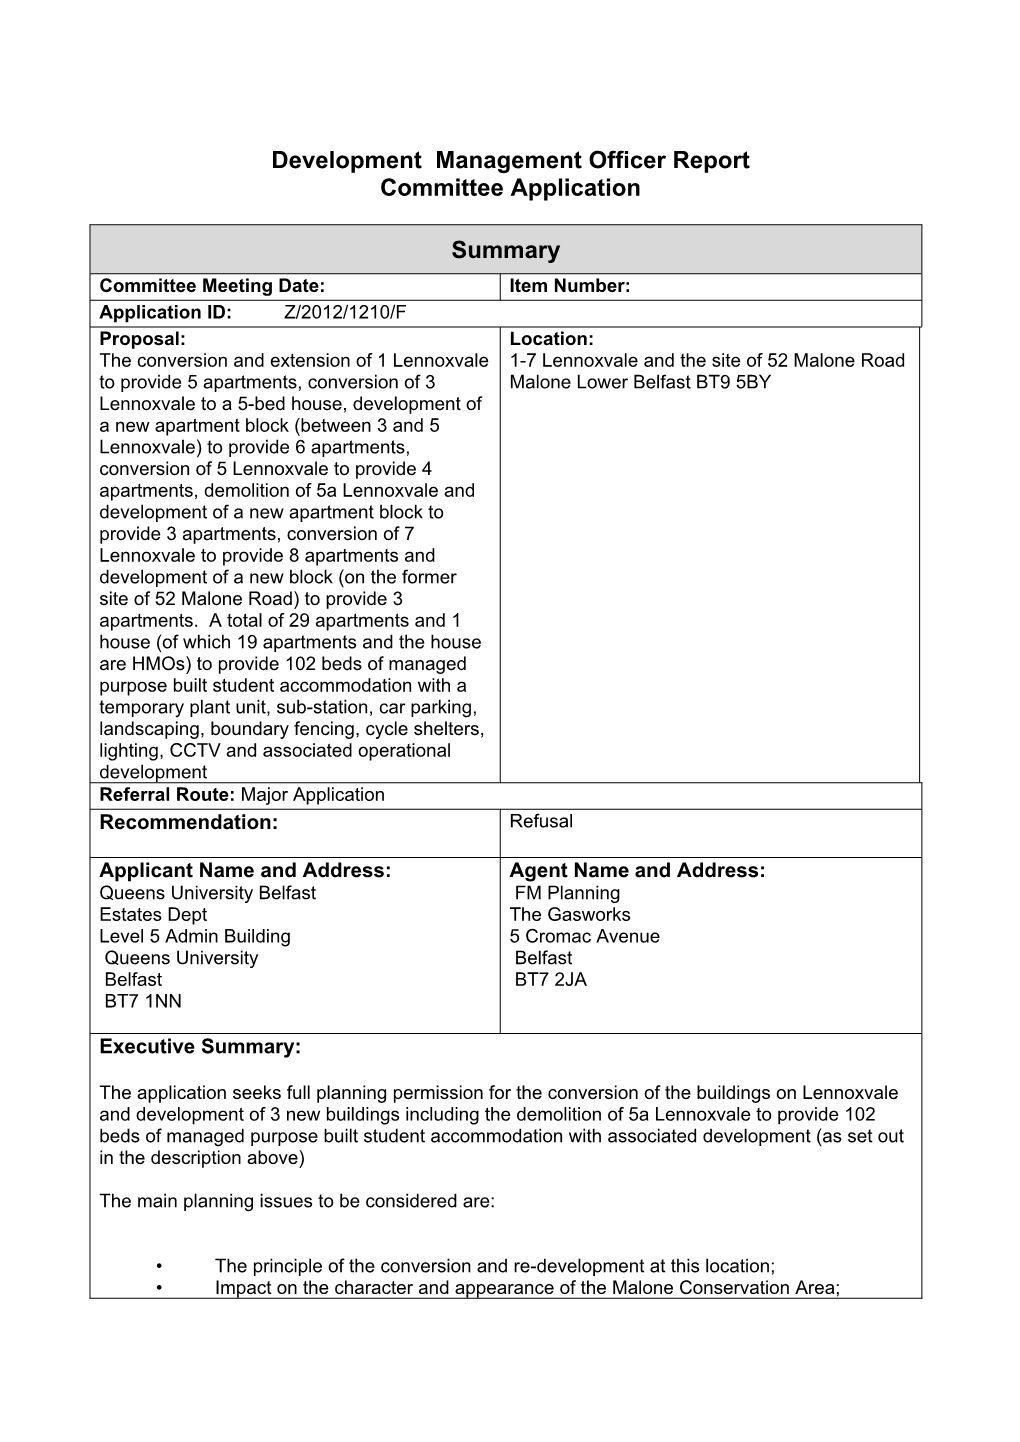 Development Management Officer Report Committee Application Summary